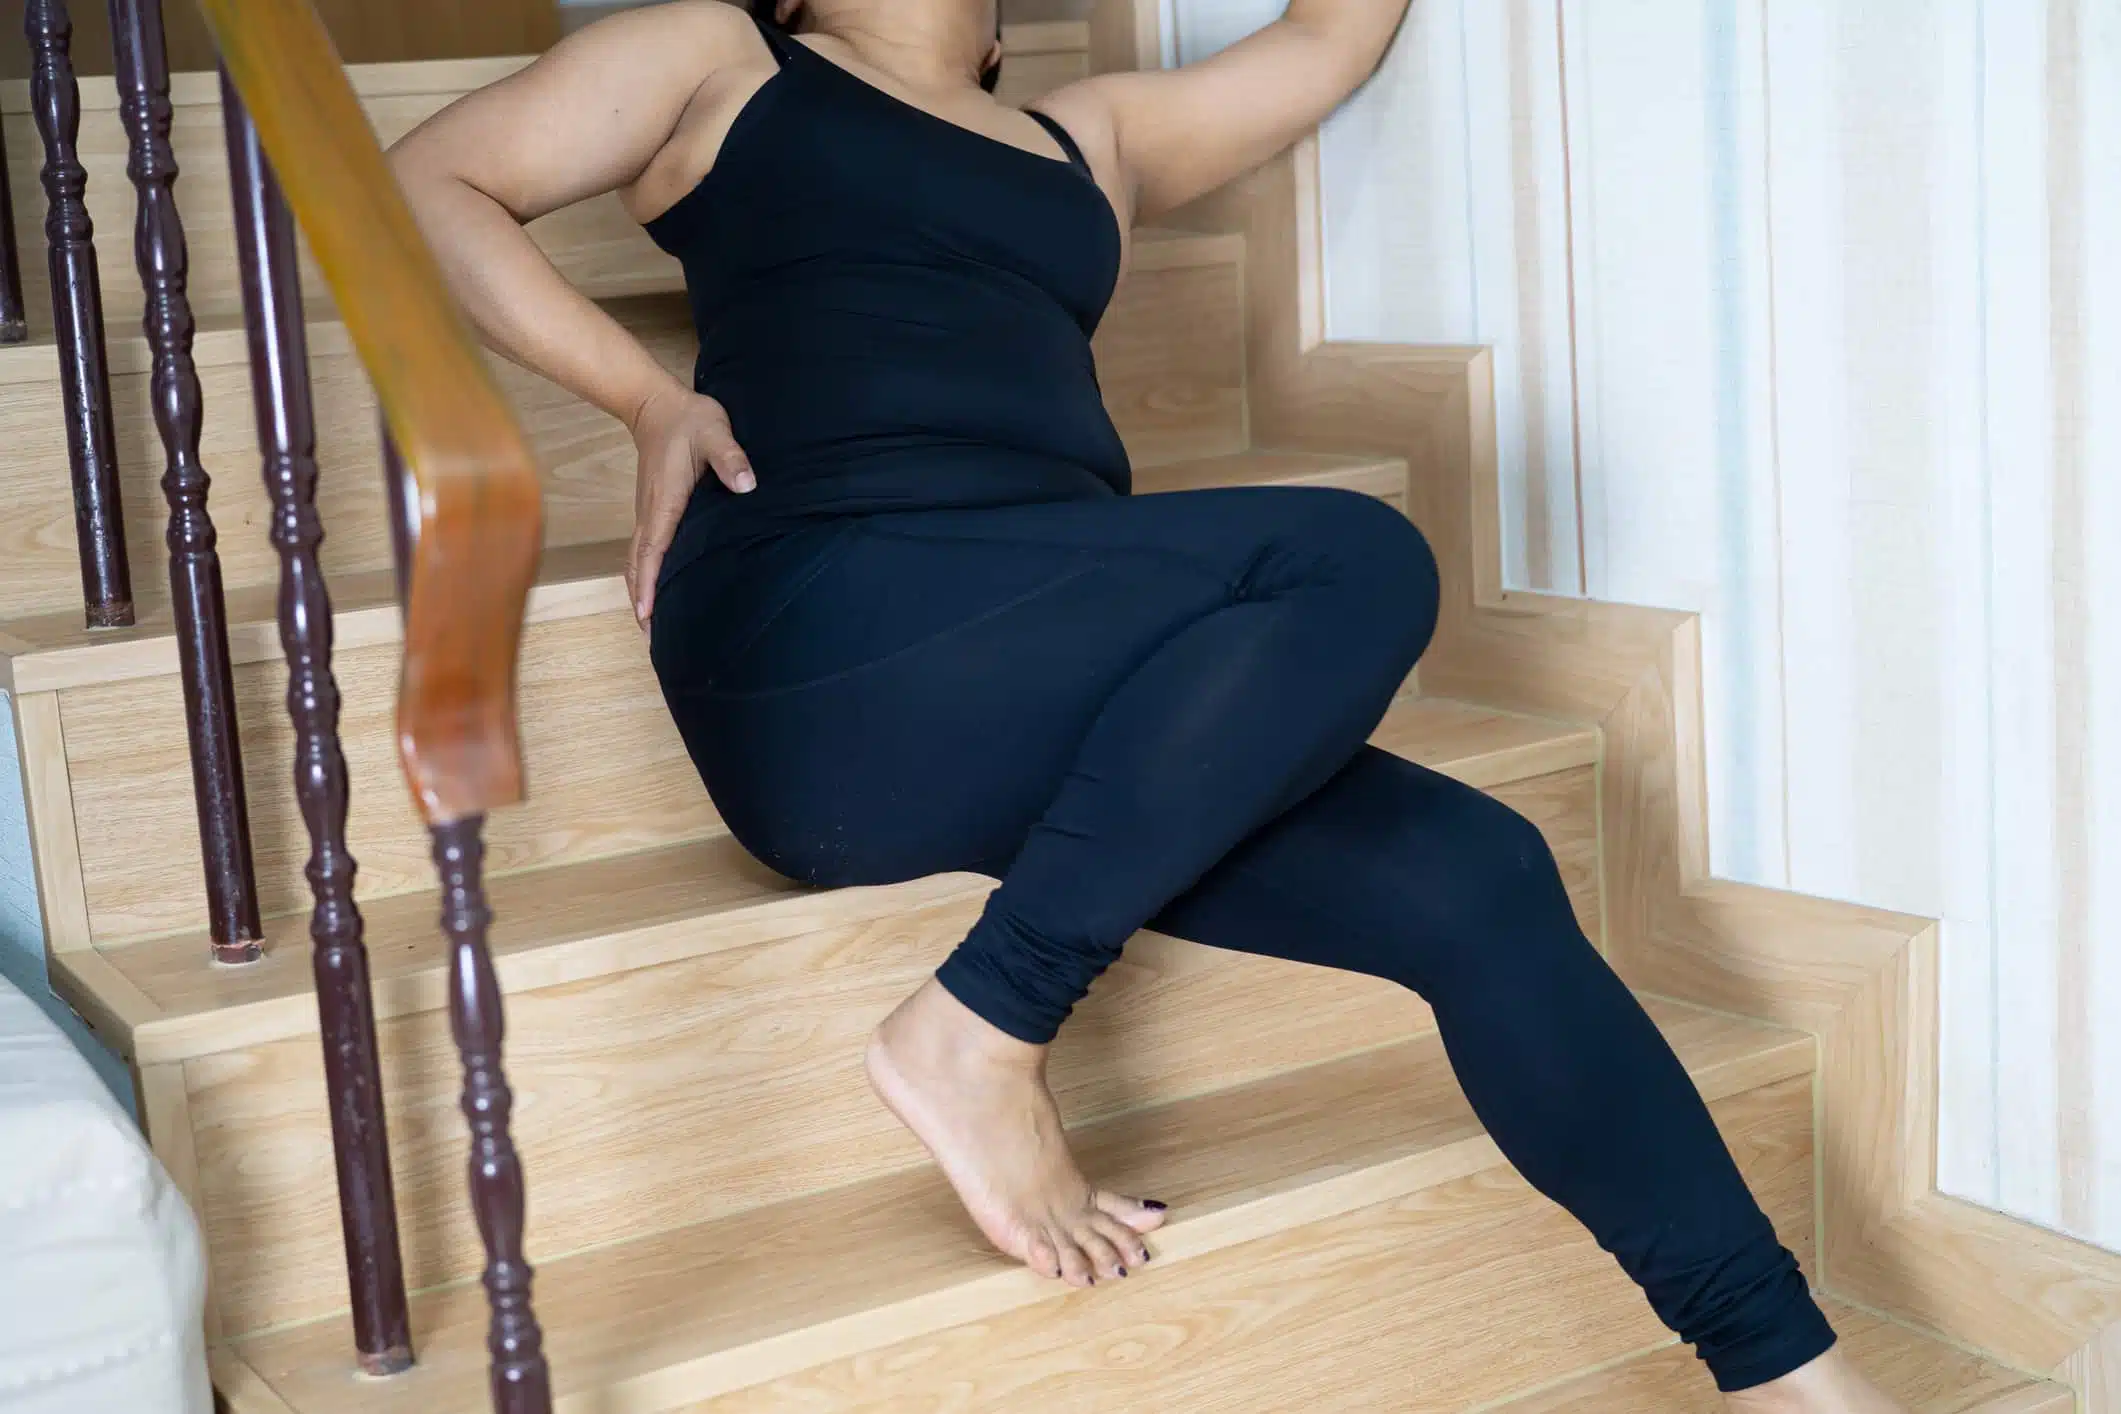 Lady sitting on stairs with injury from slipping and falling on slippery stairs